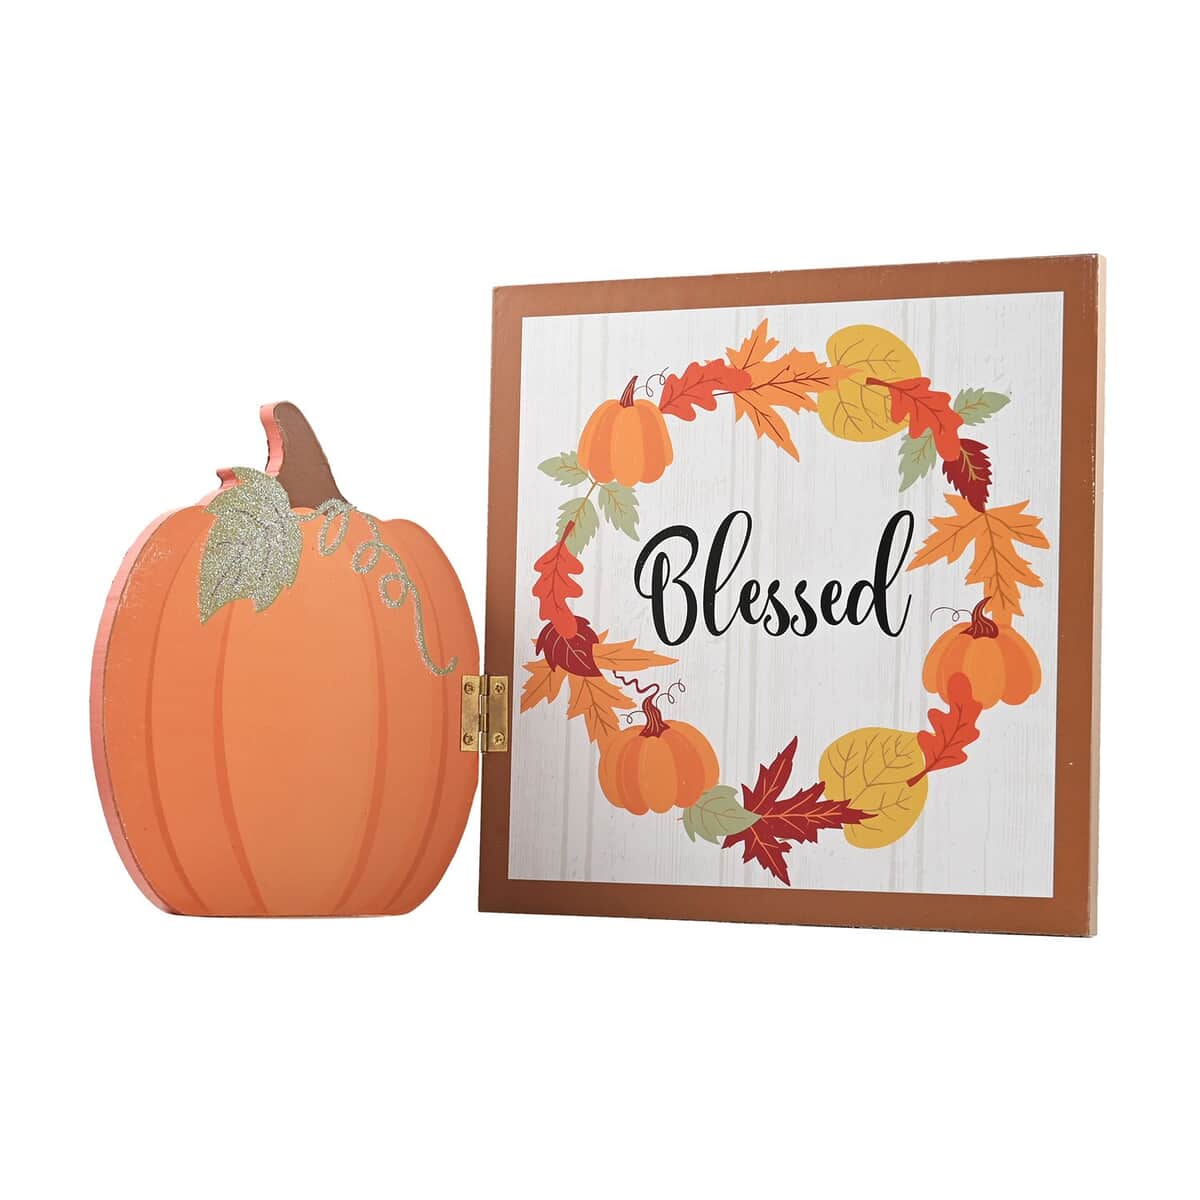 Harvest "Blessed" Table Decor 13 X 0.4 X 7.9 Inches image number 0